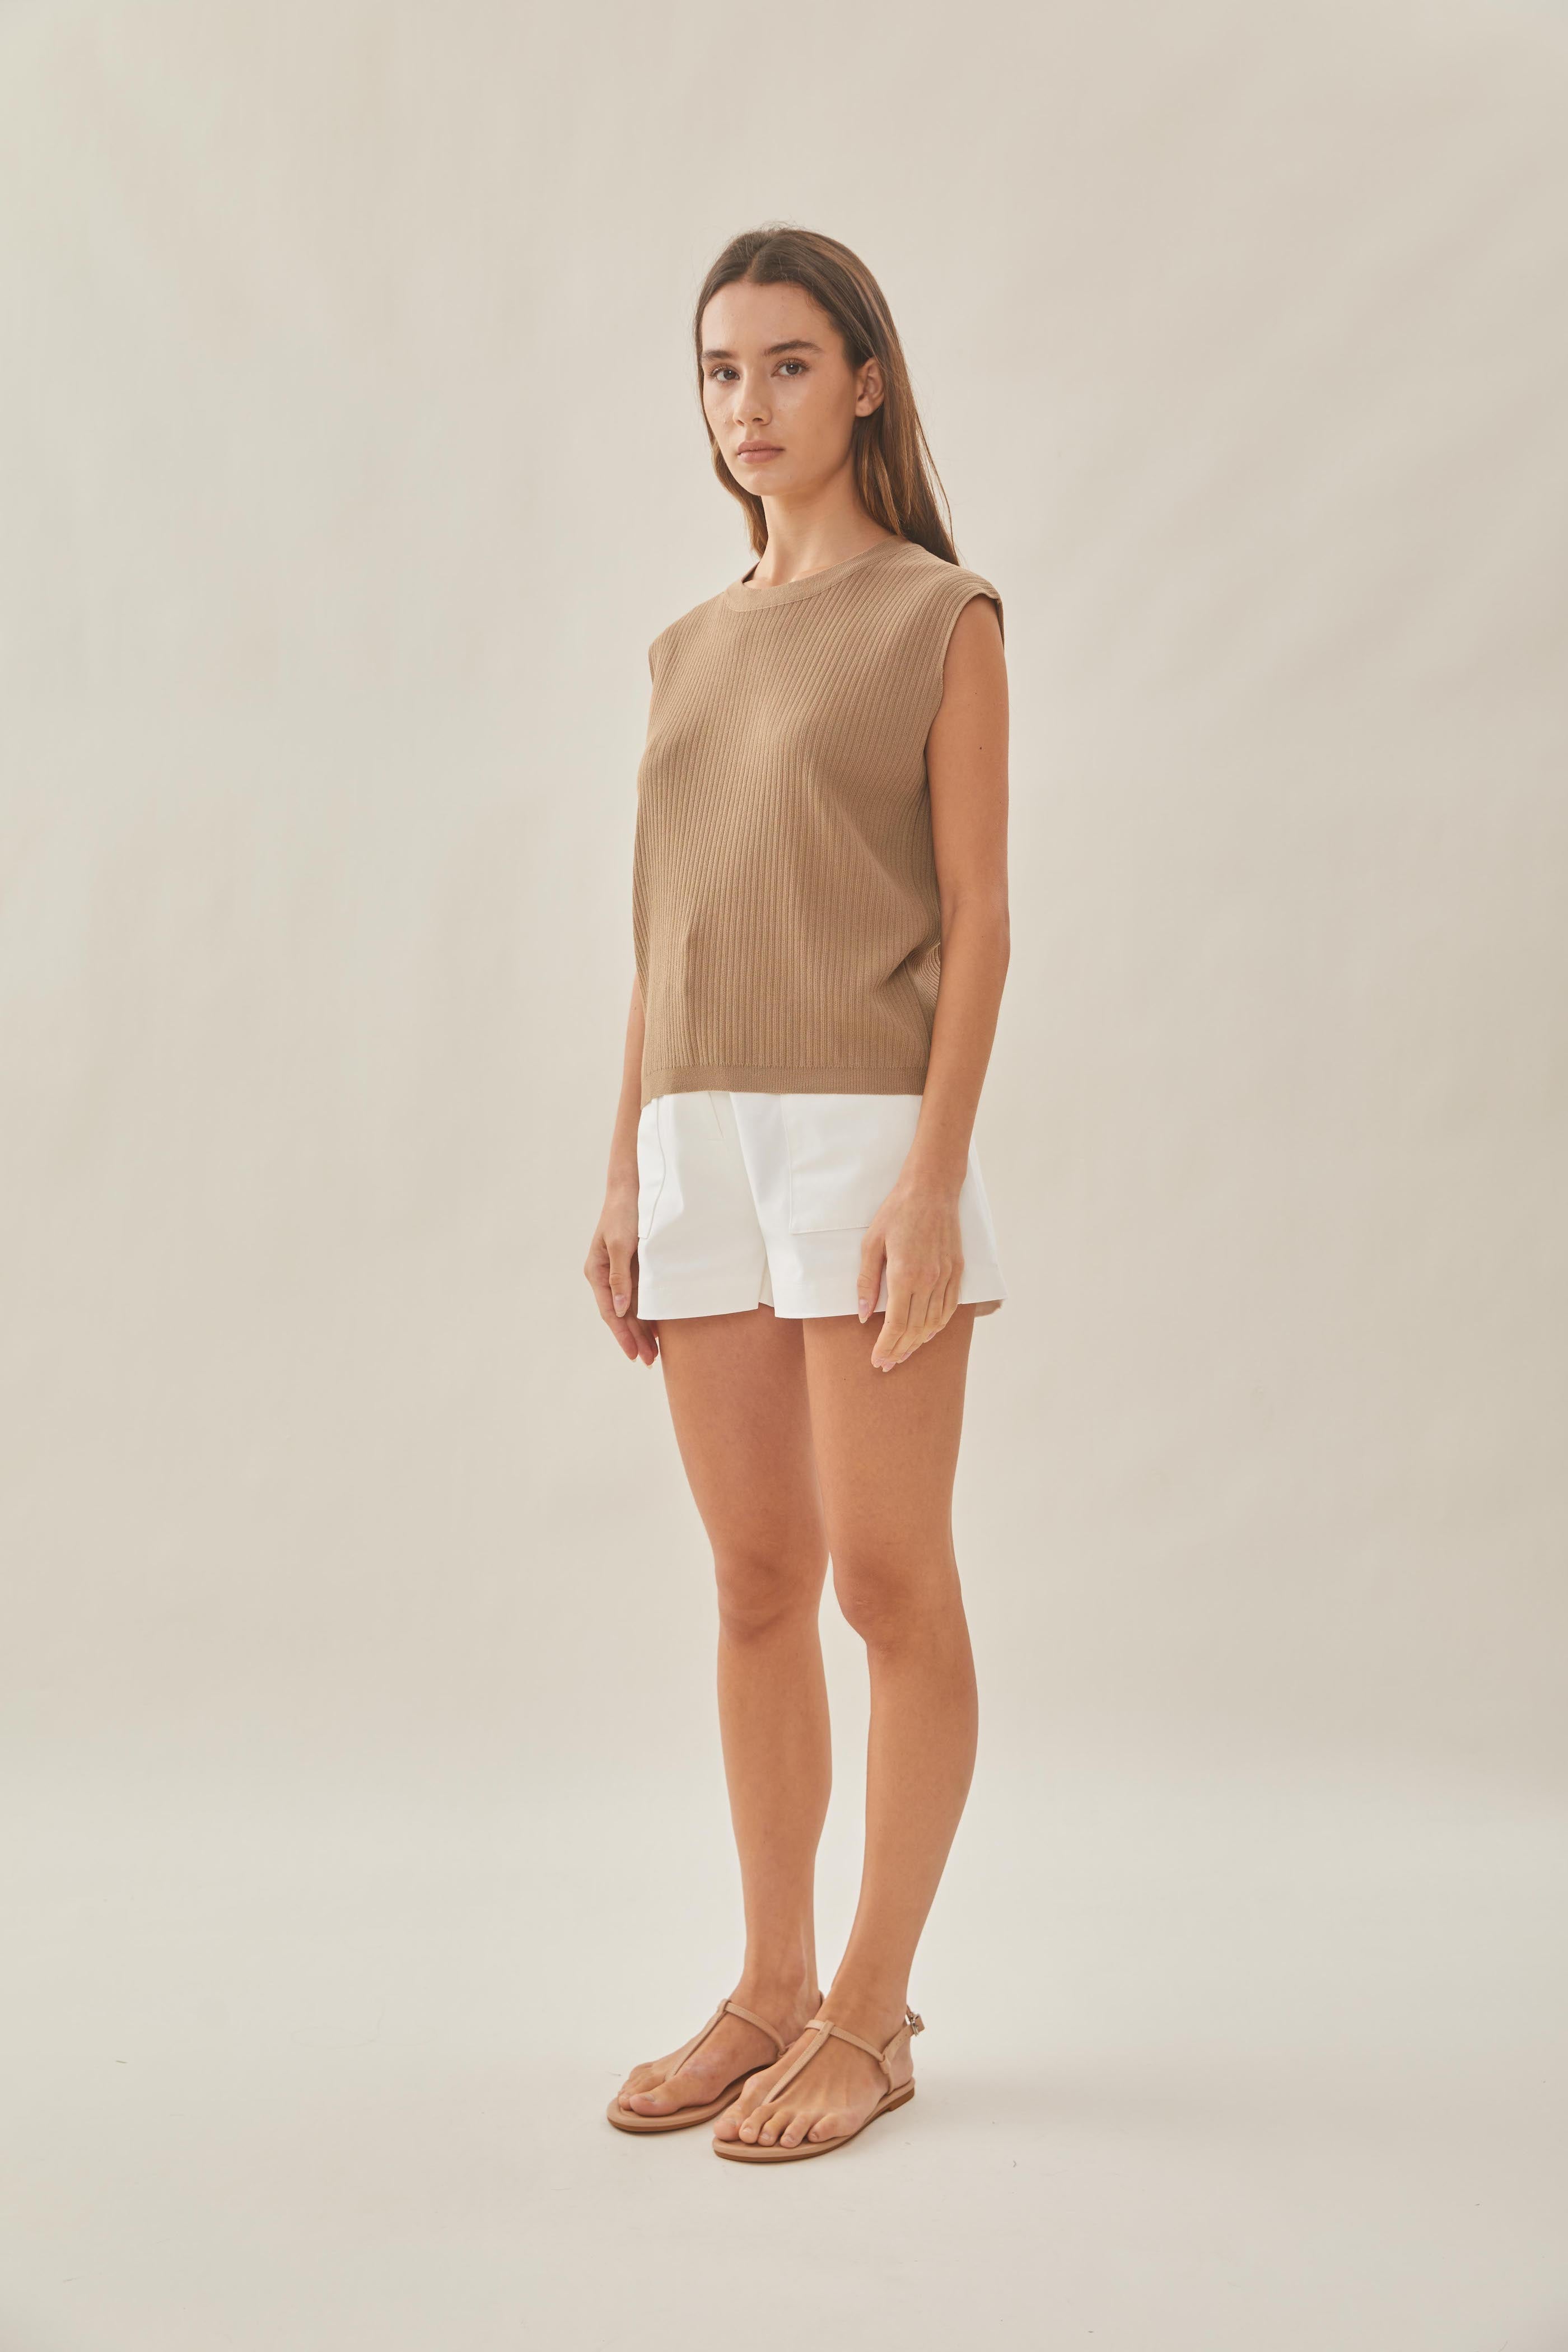 Knitted Round Neck Sleeveless Top in Tan